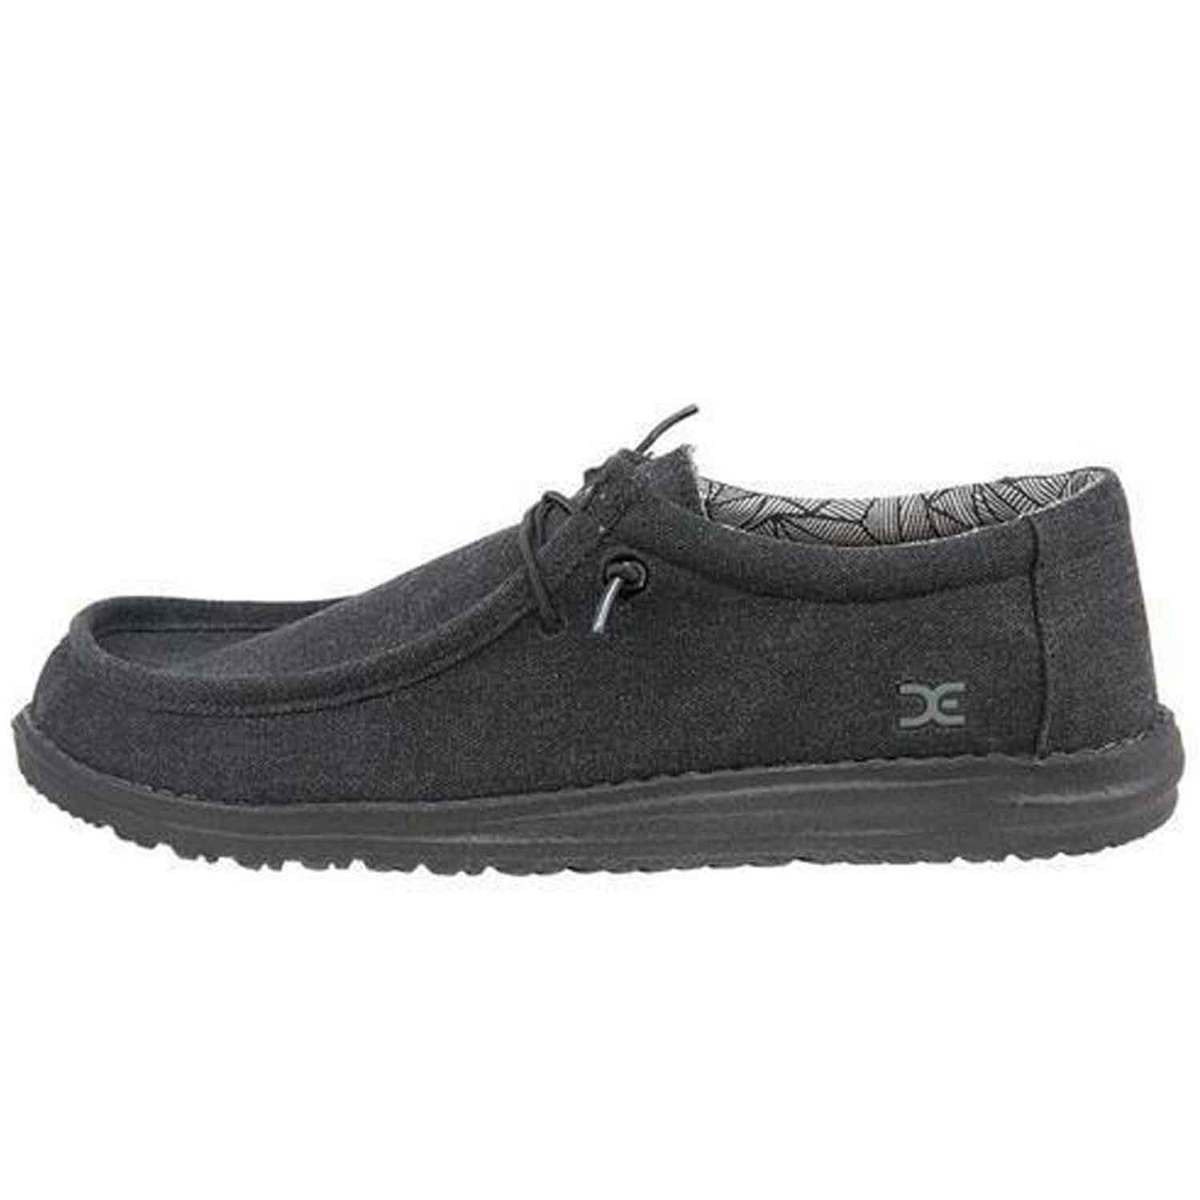 Hey Dude Men's Wally Canvas Casual Shoes - Black - Size 13 - Black 13 ...